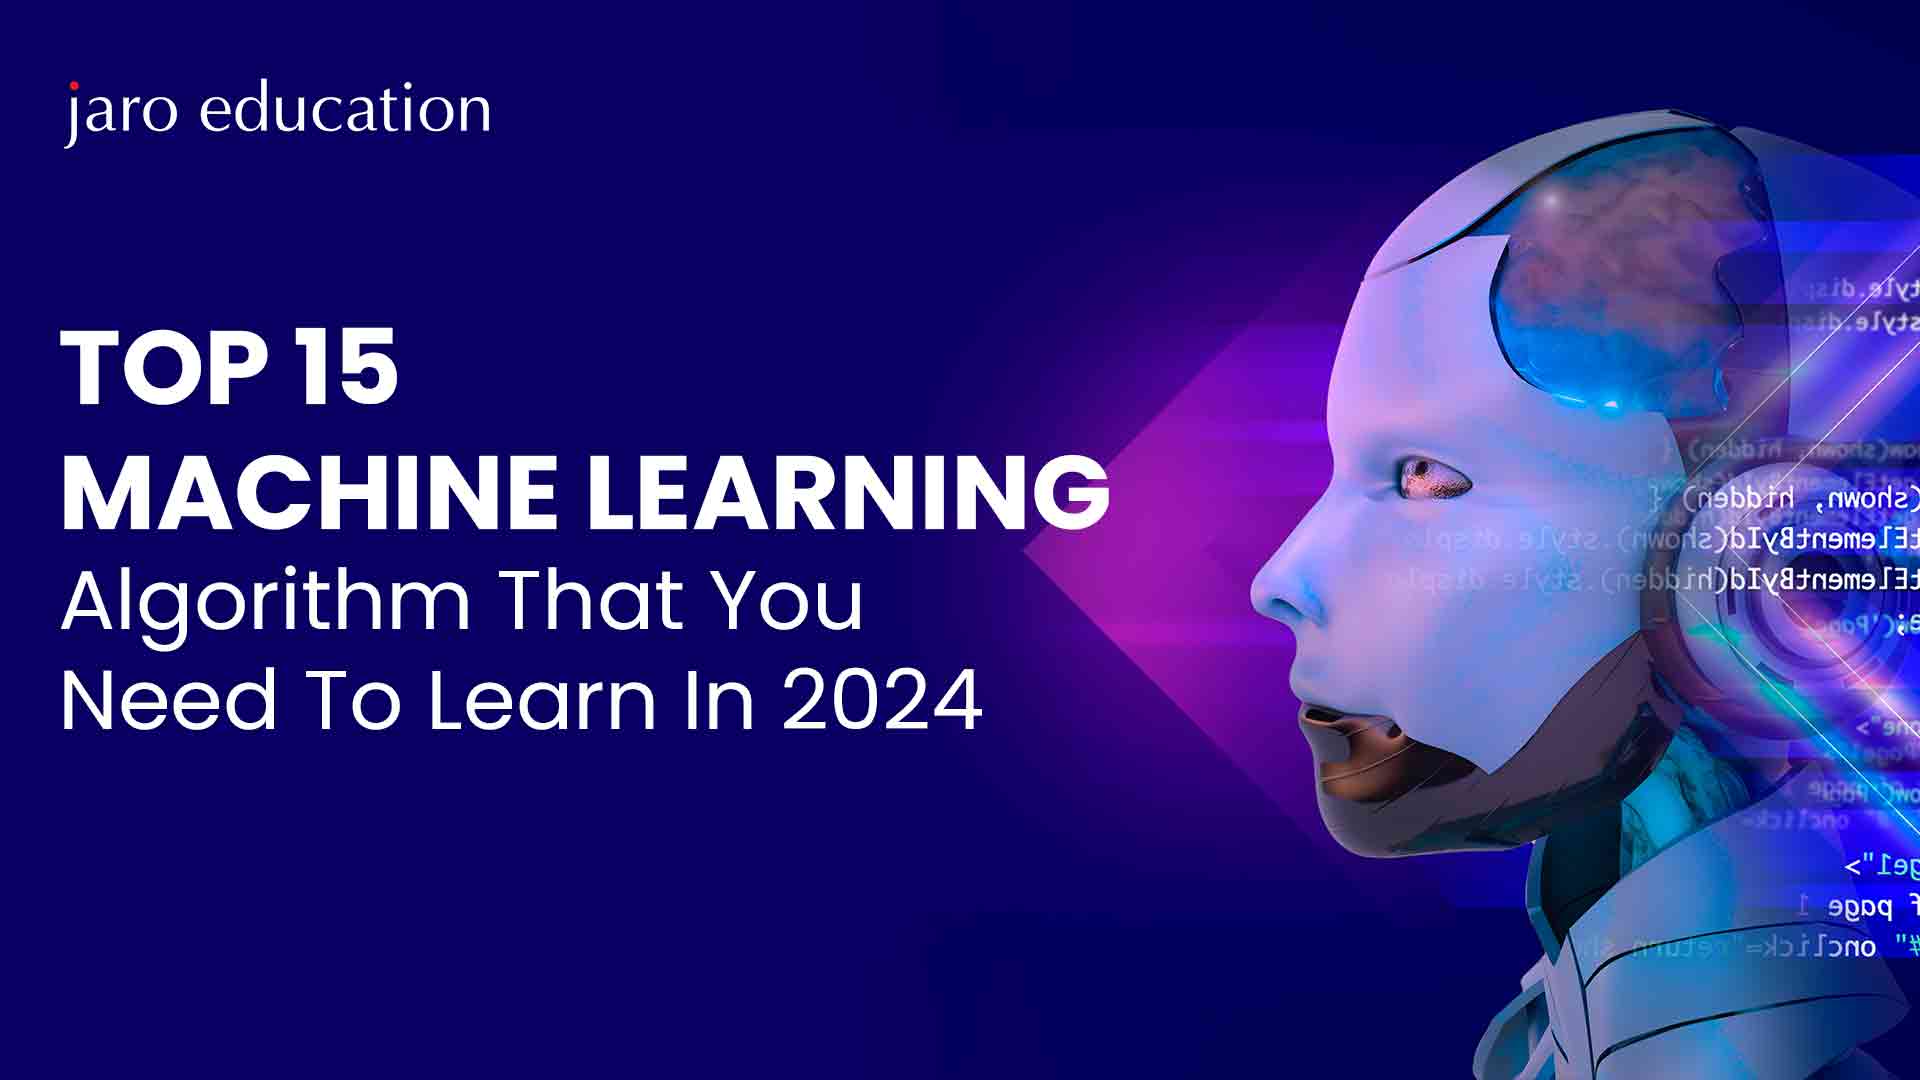 Top 15 Machine Learning Algorithm That You Need To Learn In 2024